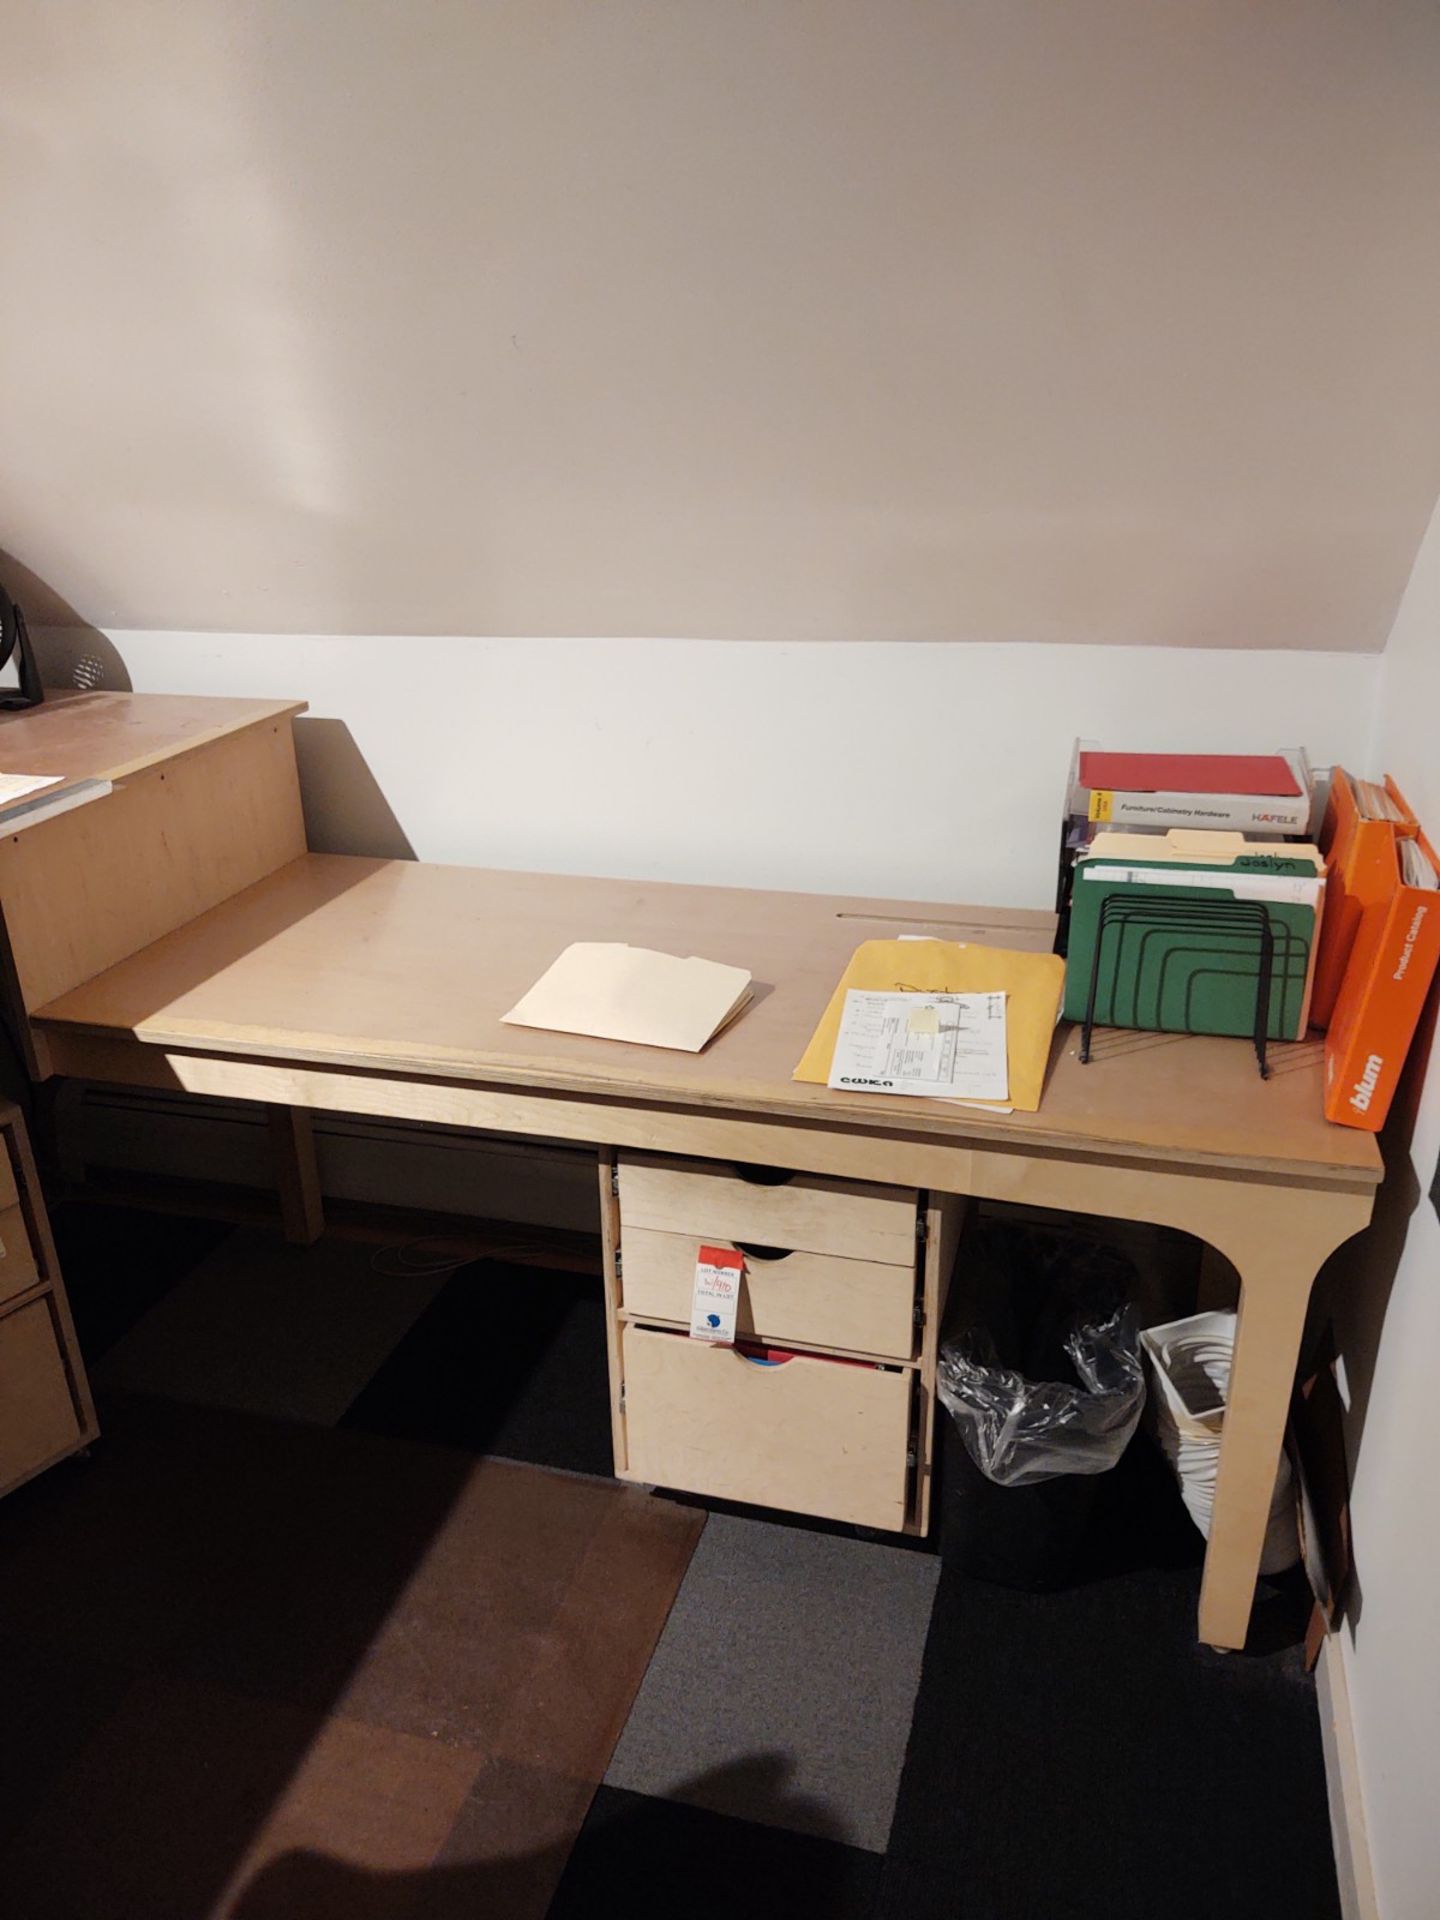 L-Shaped Wood Desk w/ (2) Portable Files and Adjustable Height Stool - Image 3 of 3